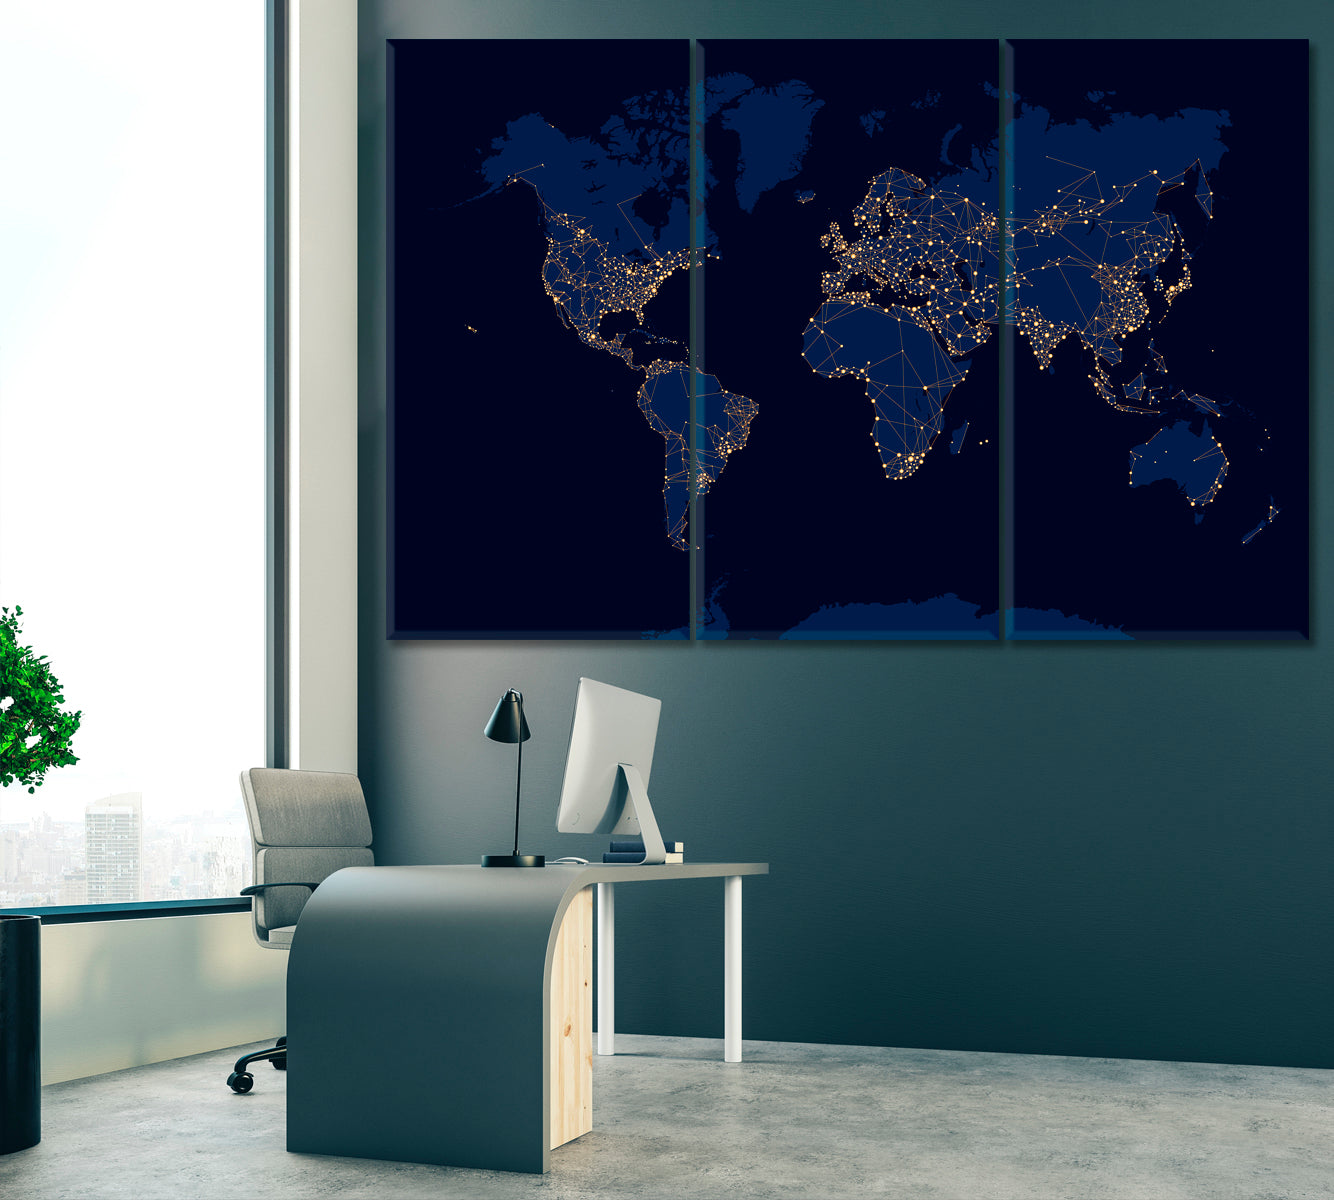 Abstract Night World Map Canvas Print ArtLexy 3 Panels 36"x24" inches 